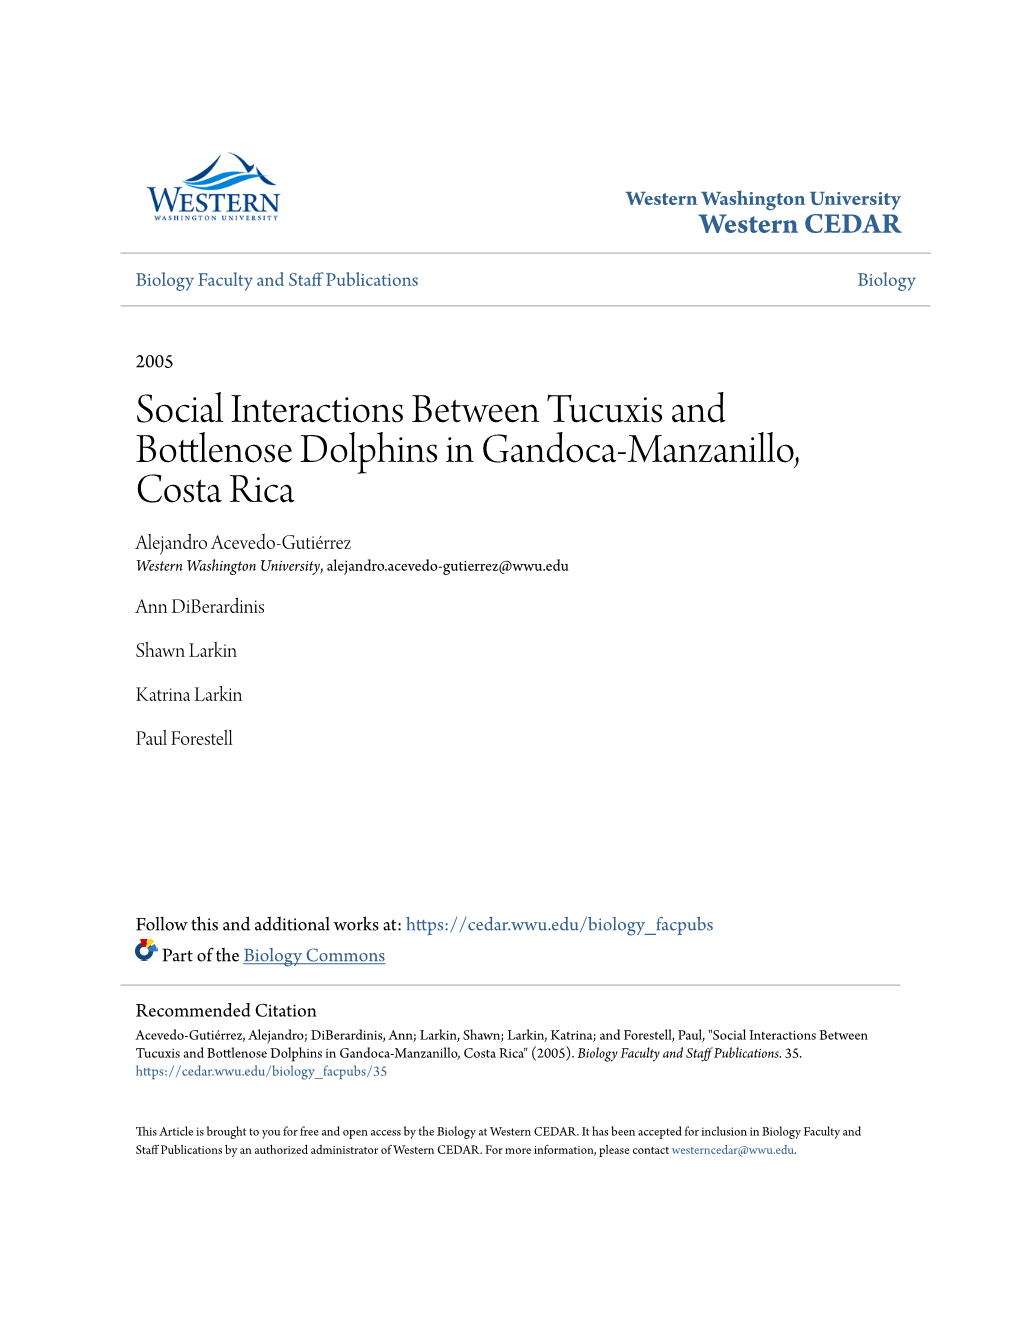 Social Interactions Between Tucuxis and Bottlenose Dolphins In